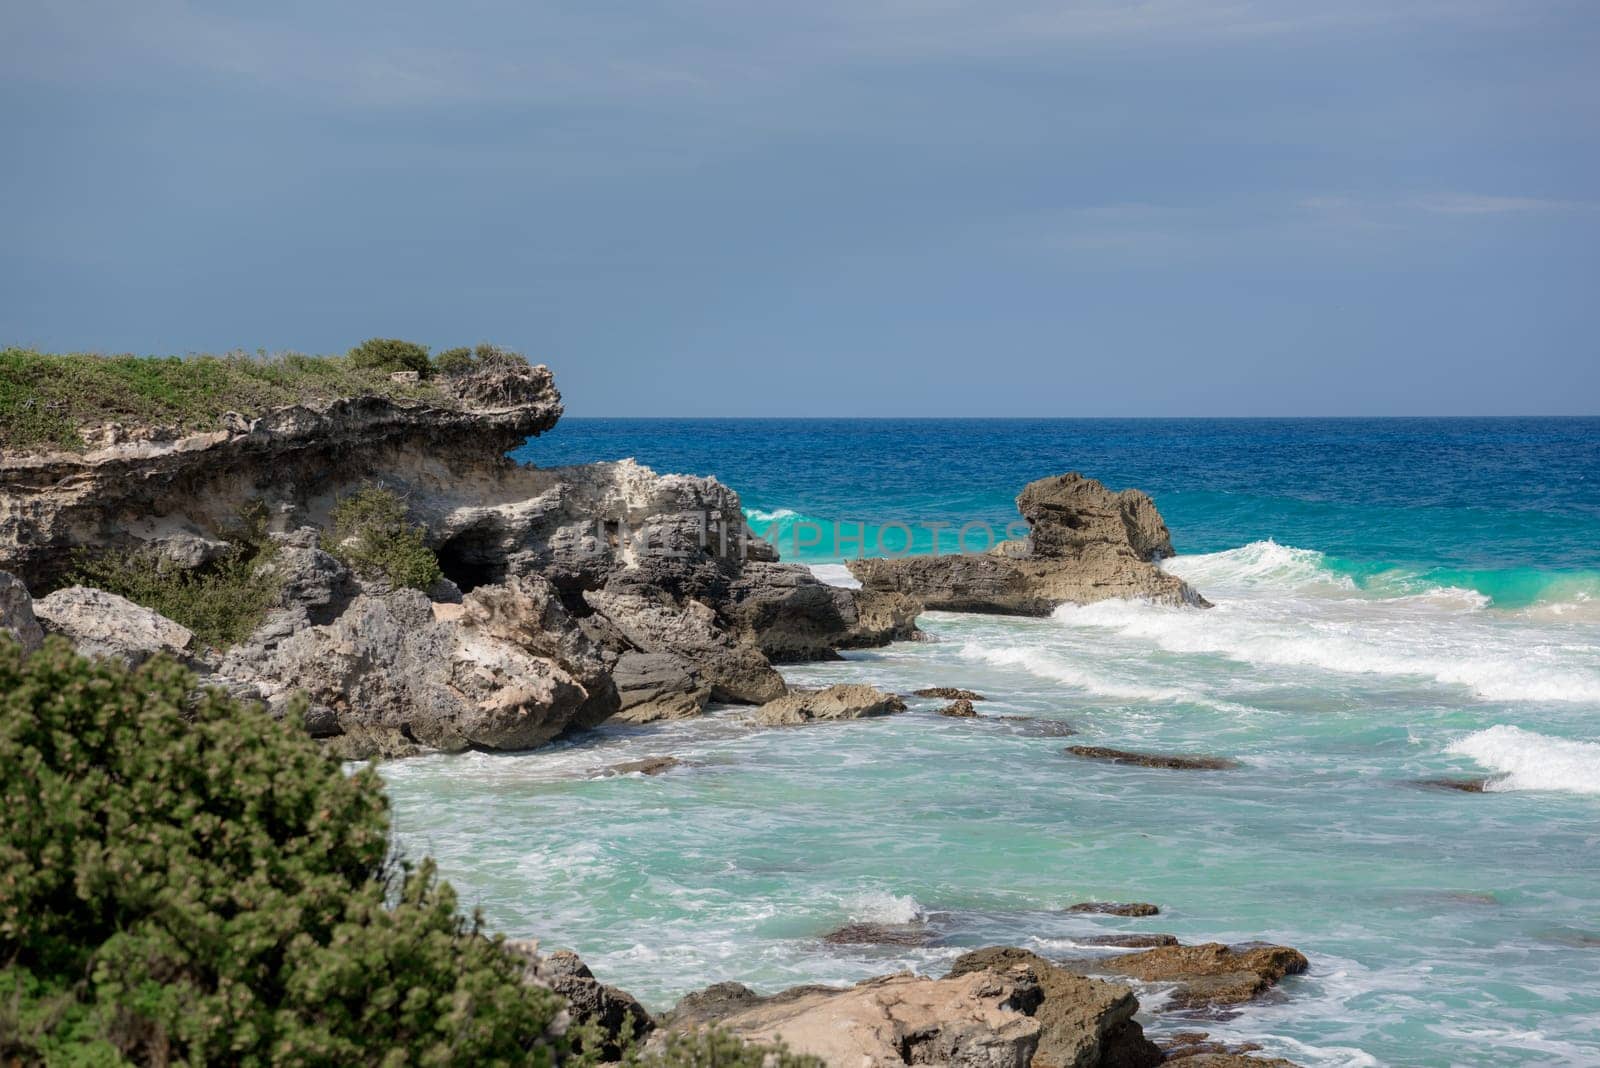 The coastline of the Caribbean Sea with white sand and rocks in Cancun.